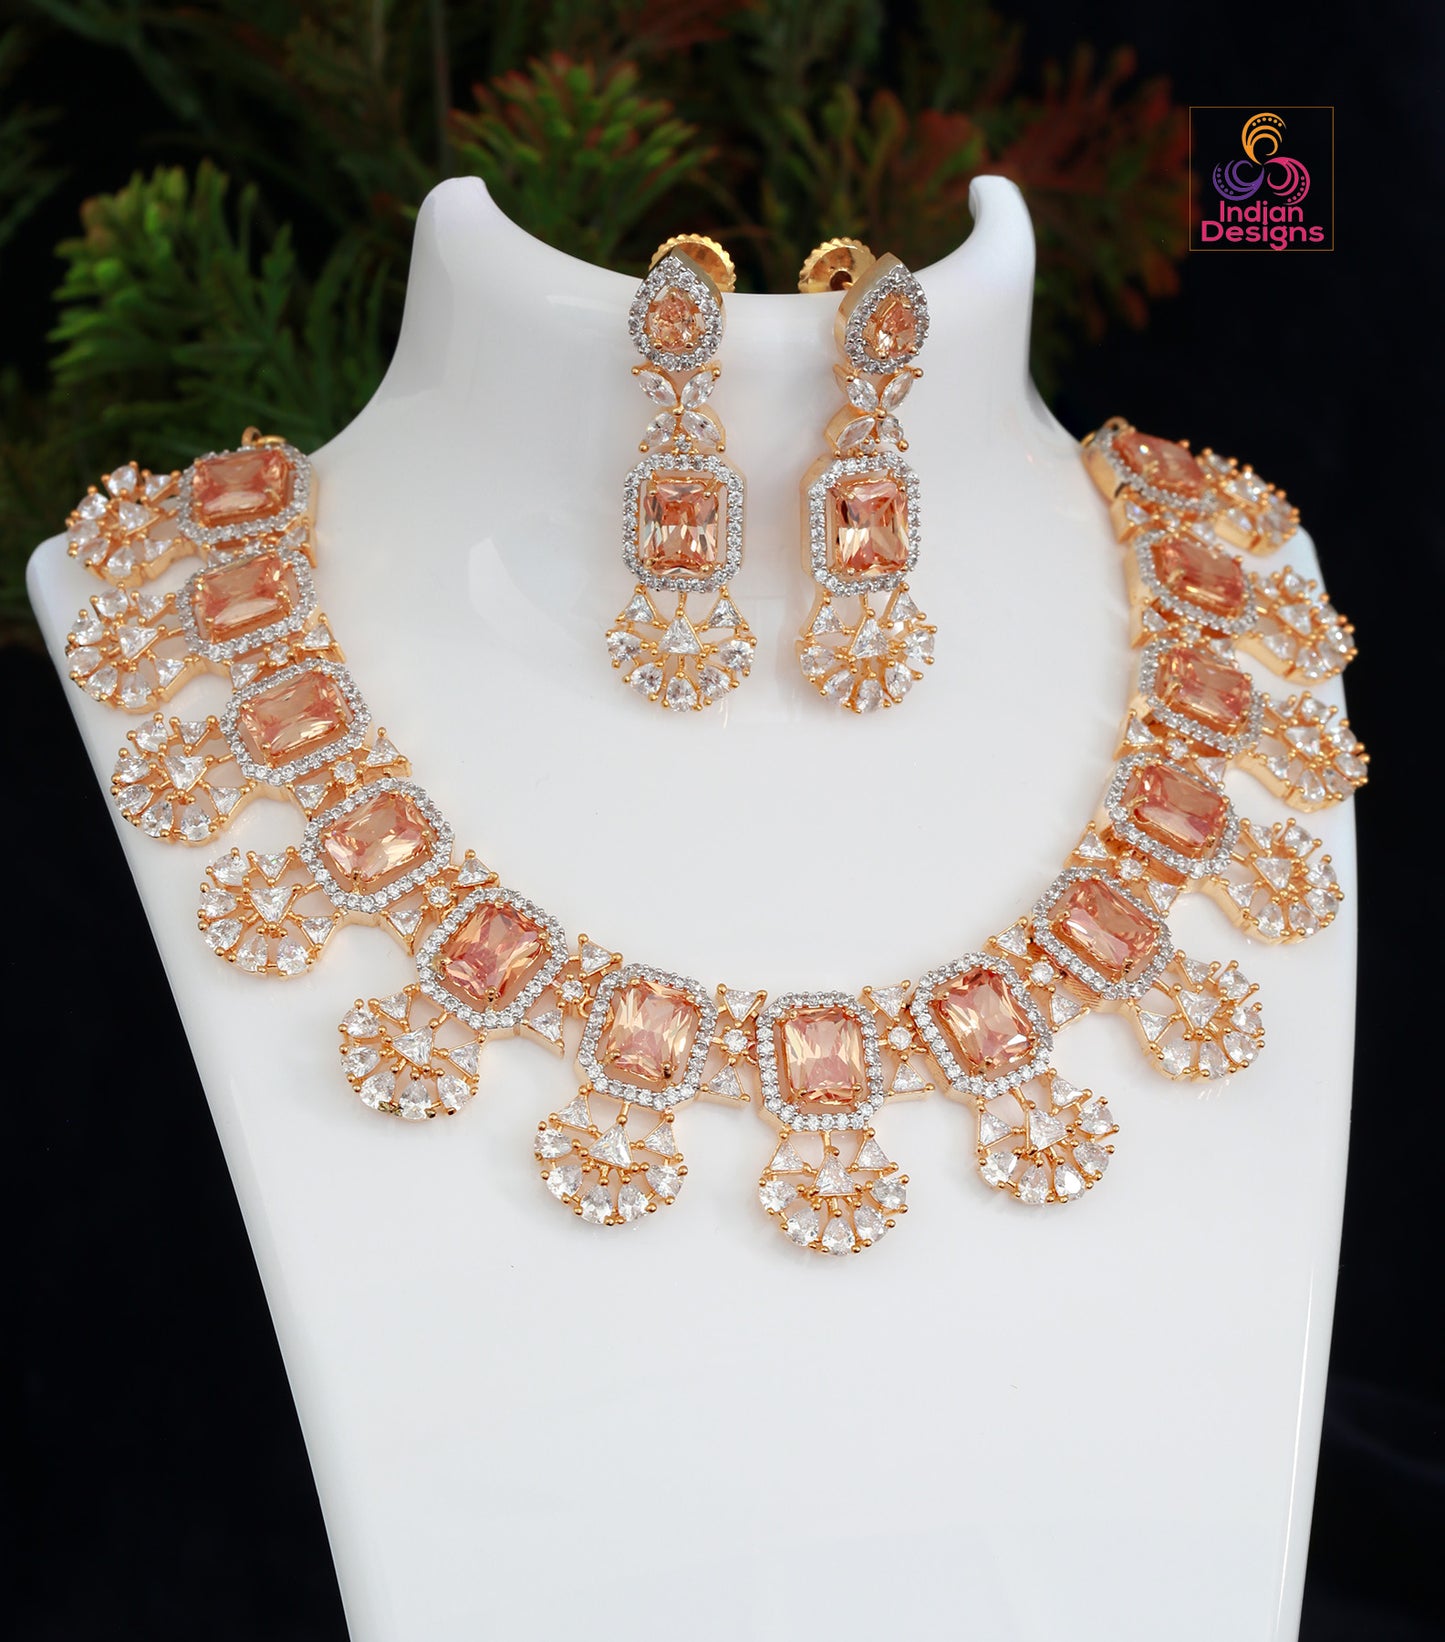 Emerald Cut Topaz stone American Diamond Gold Plated Necklace Earring set in Floral Design